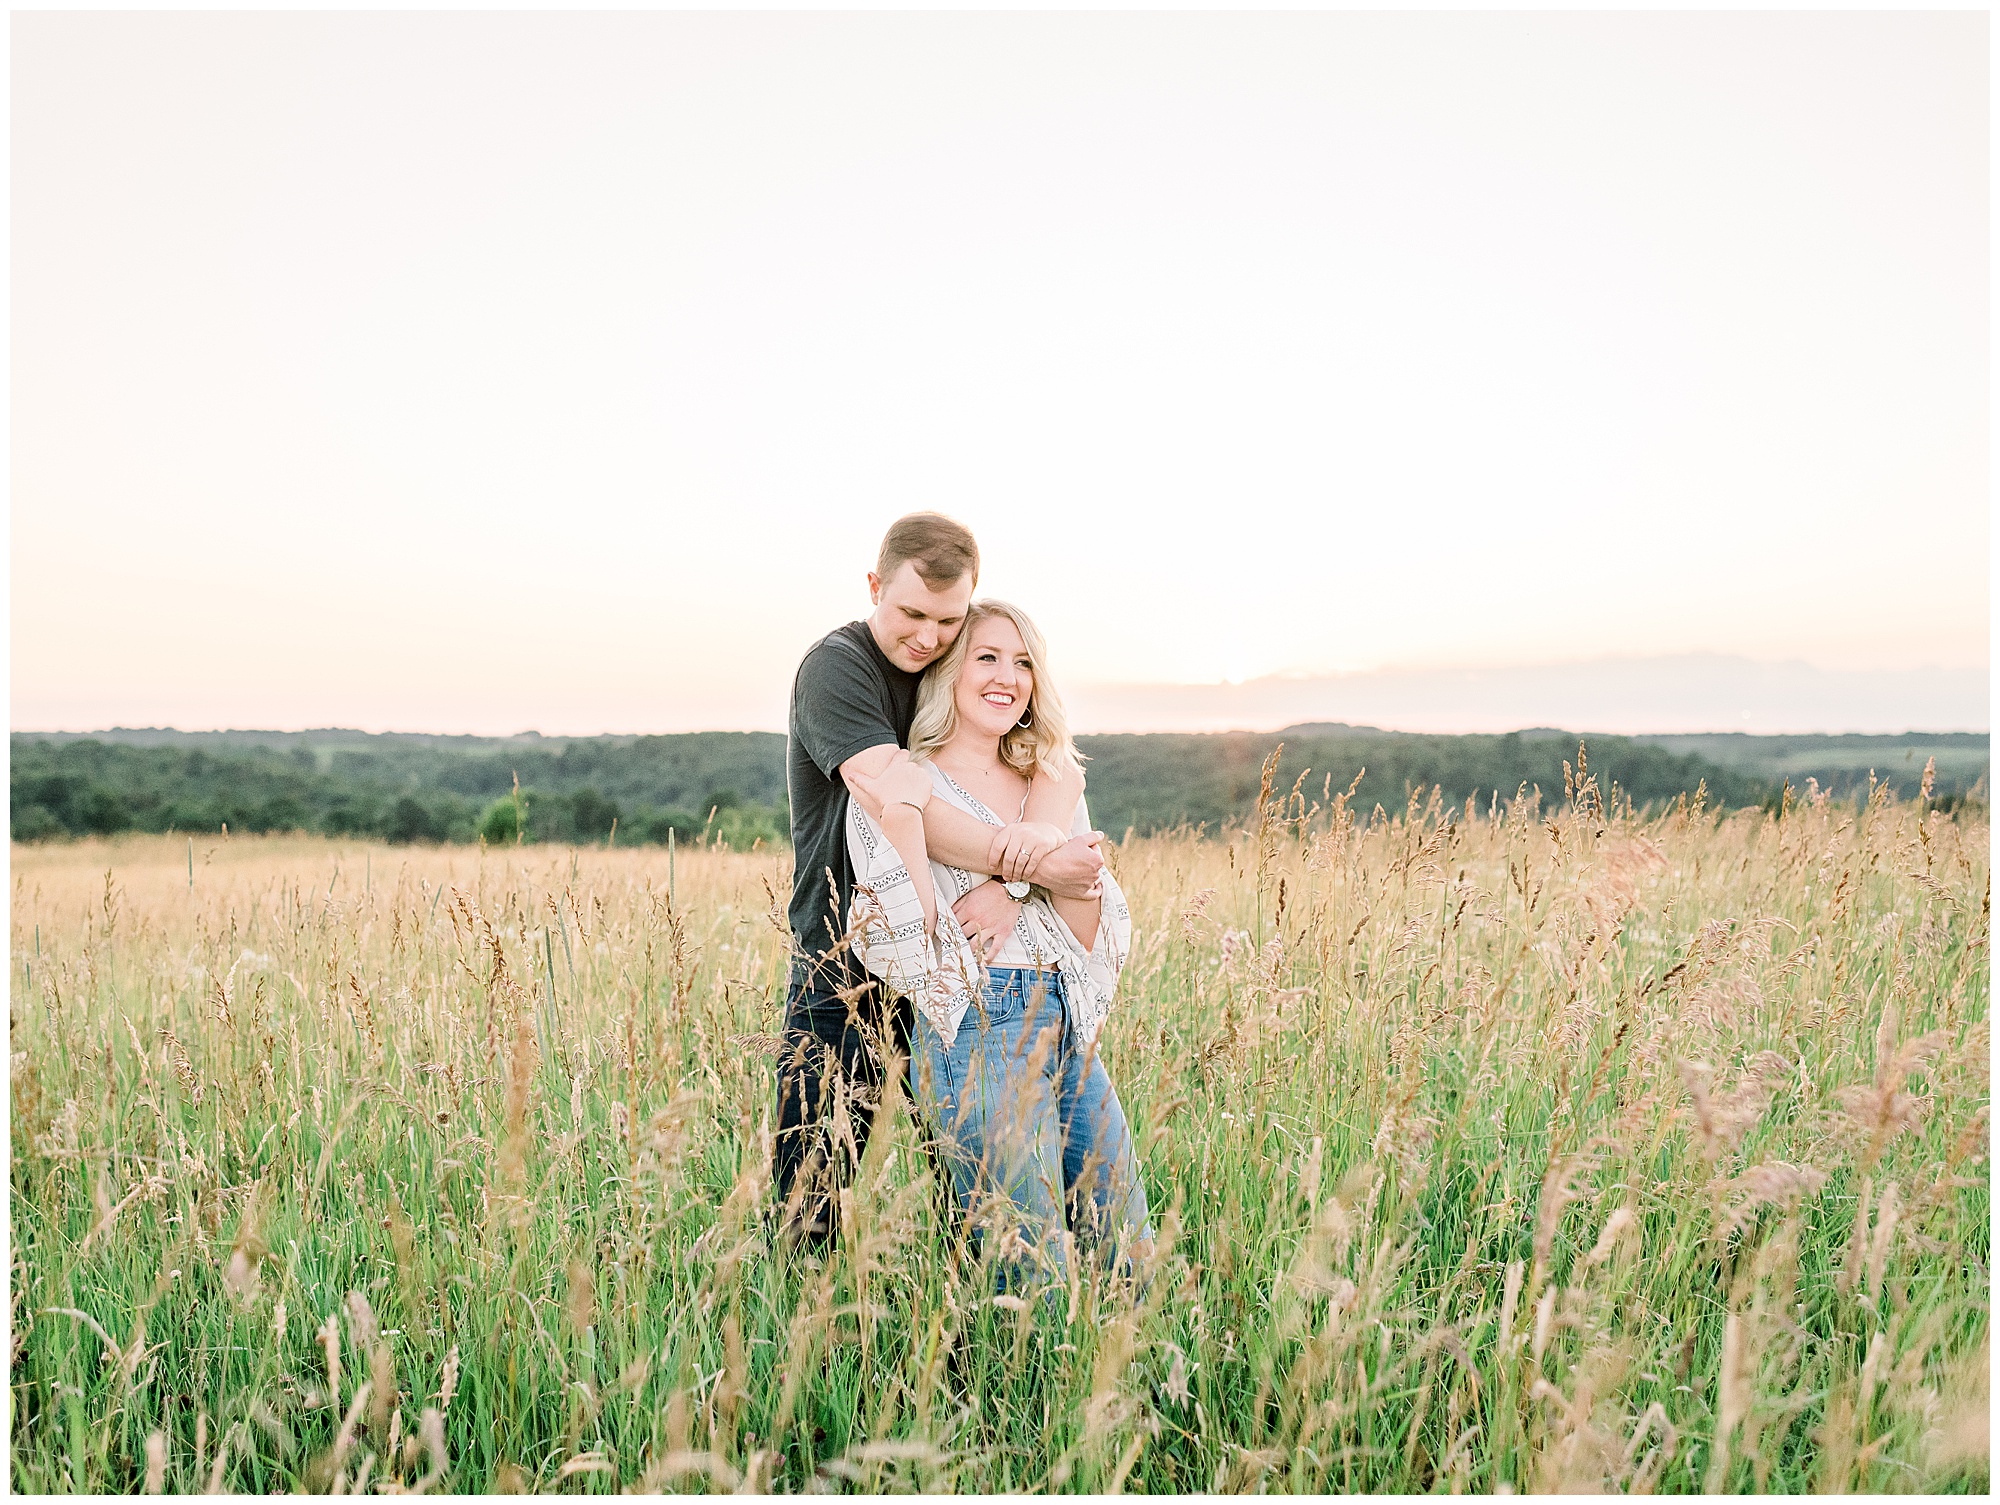 Engagement portrait of a couple in a field at sunset.